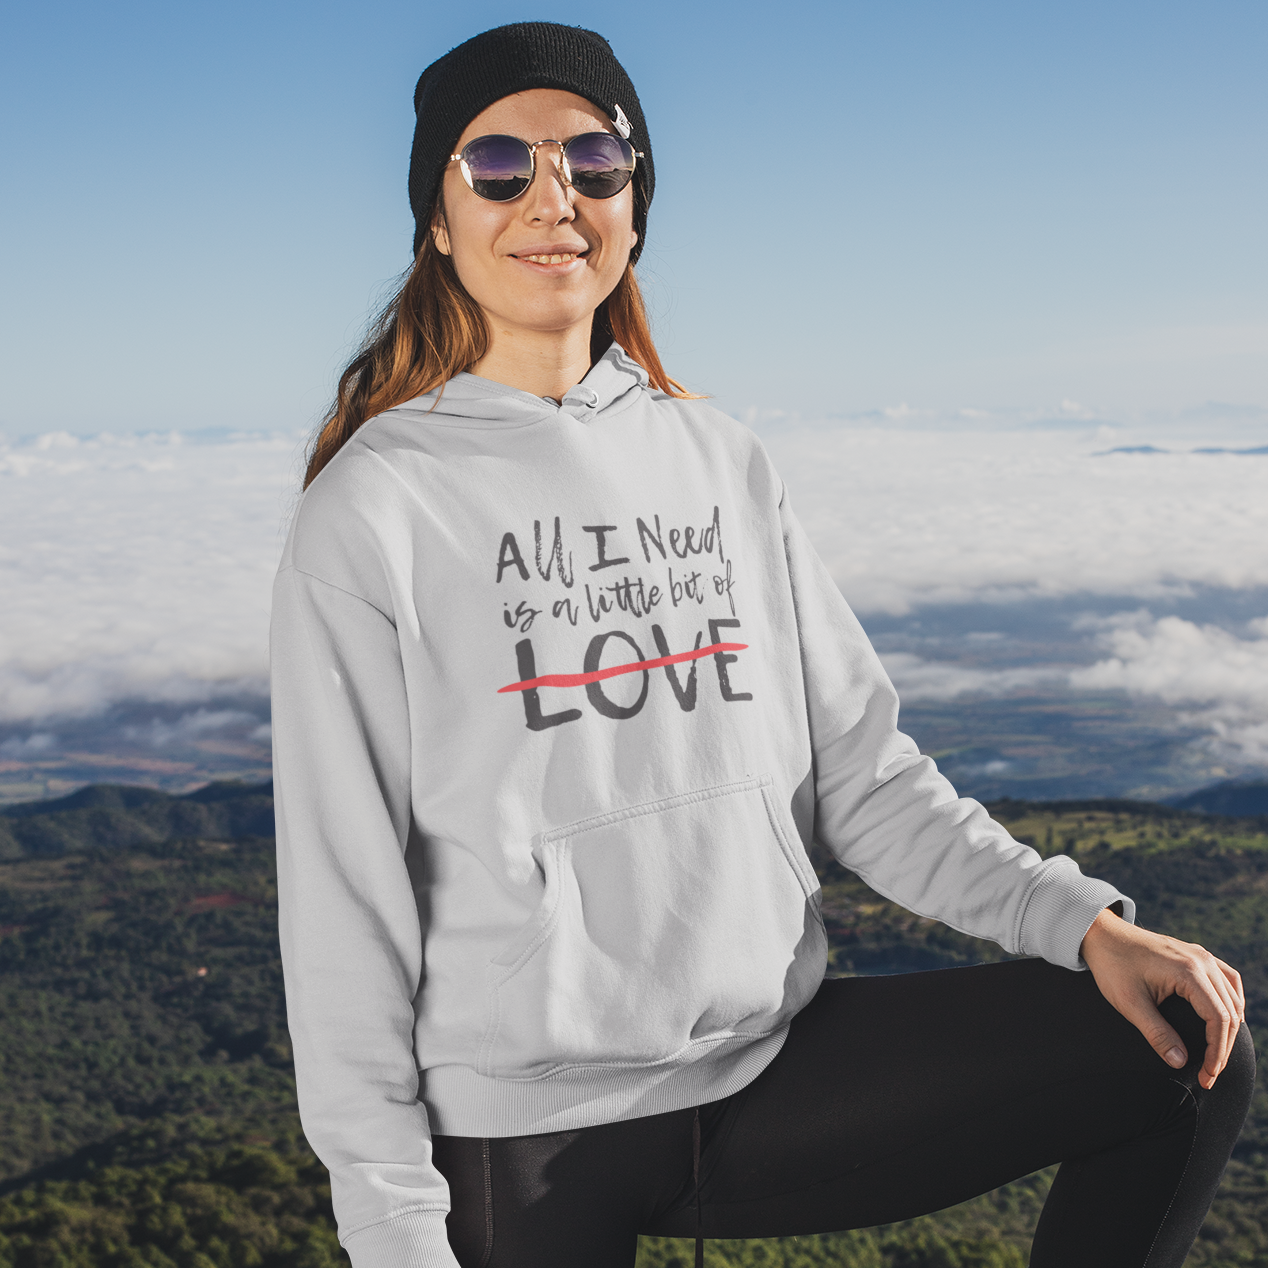 All I Need is LOVE Hoodies for winter